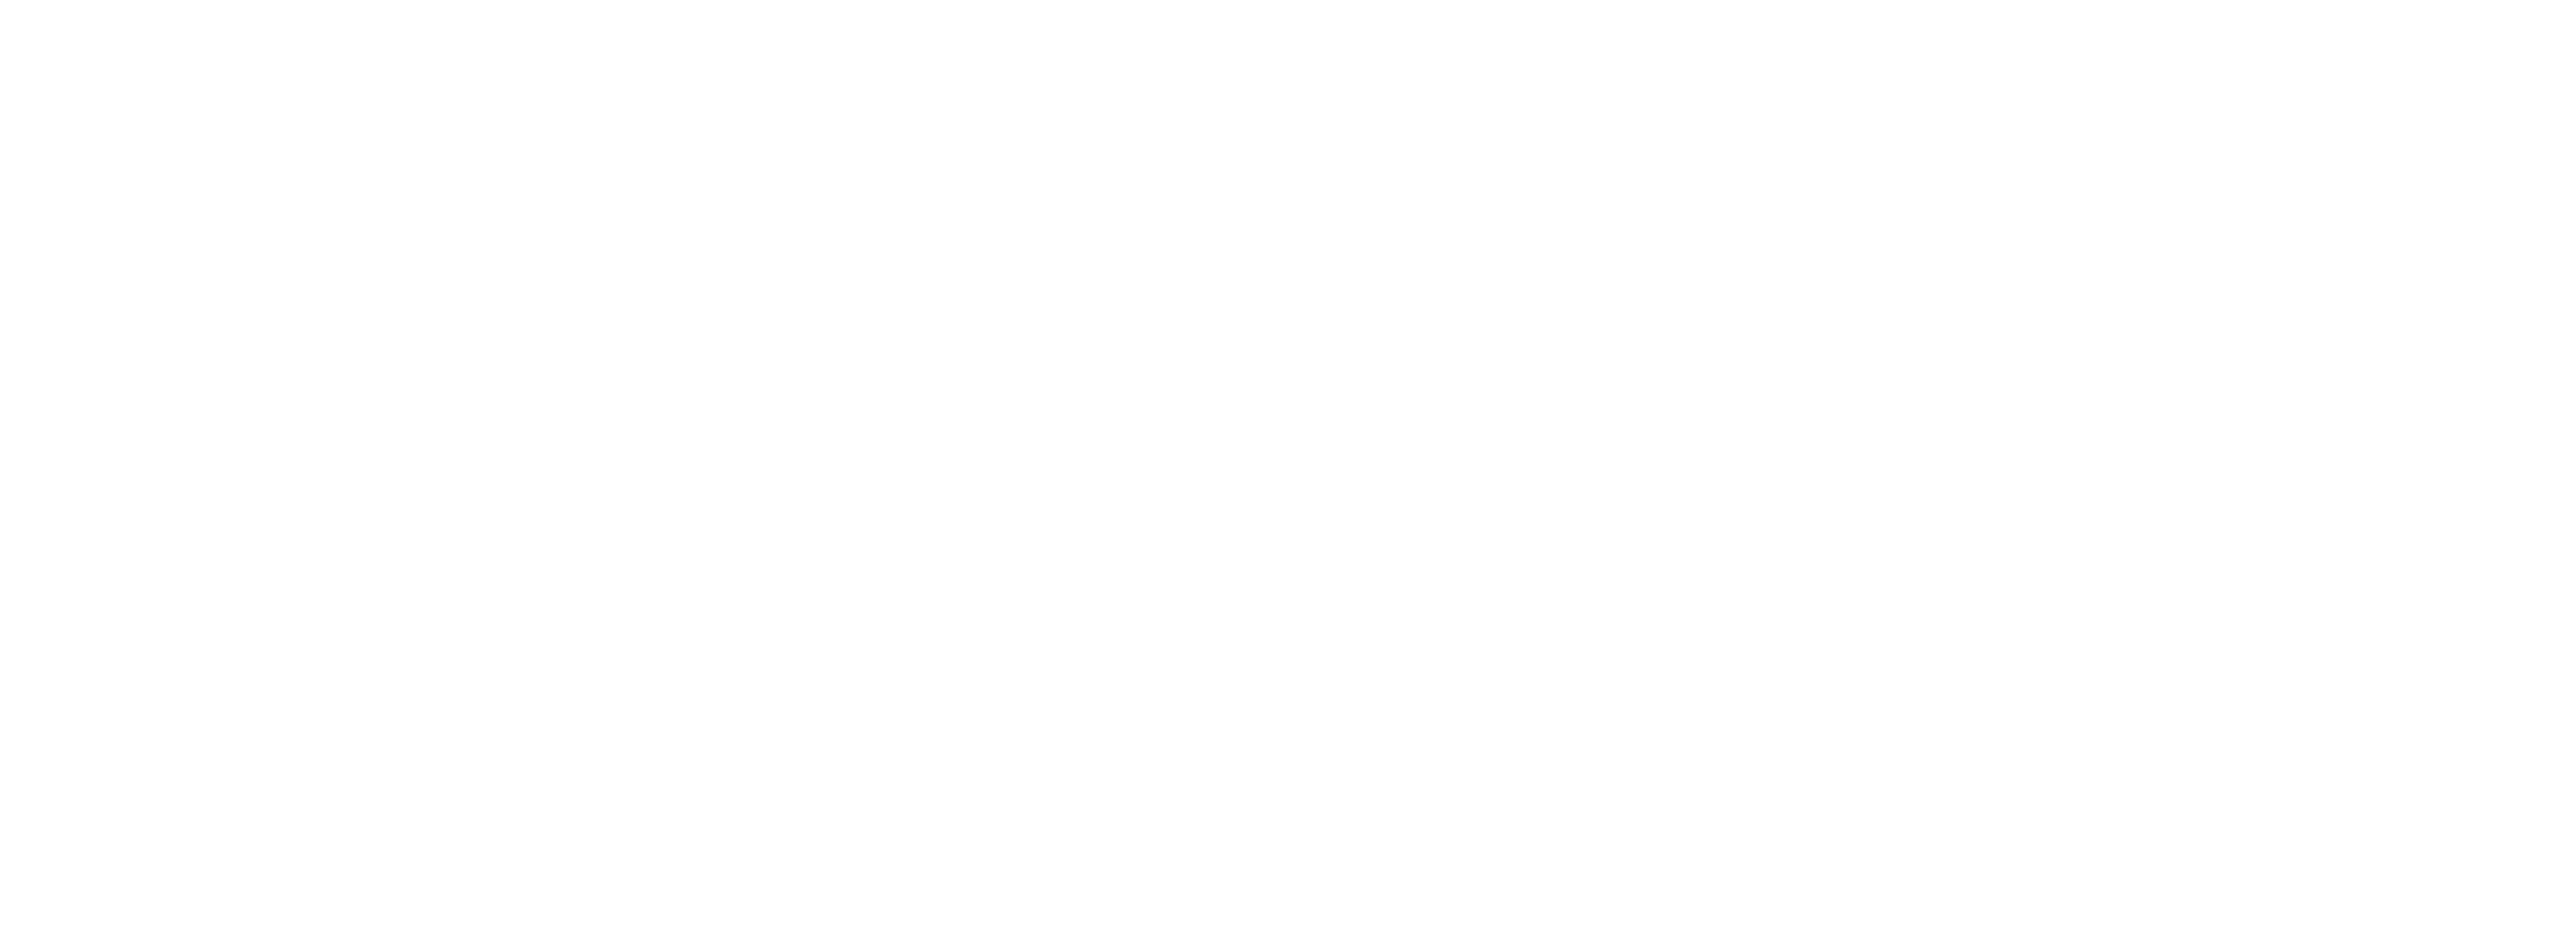 the 137th Berry Show